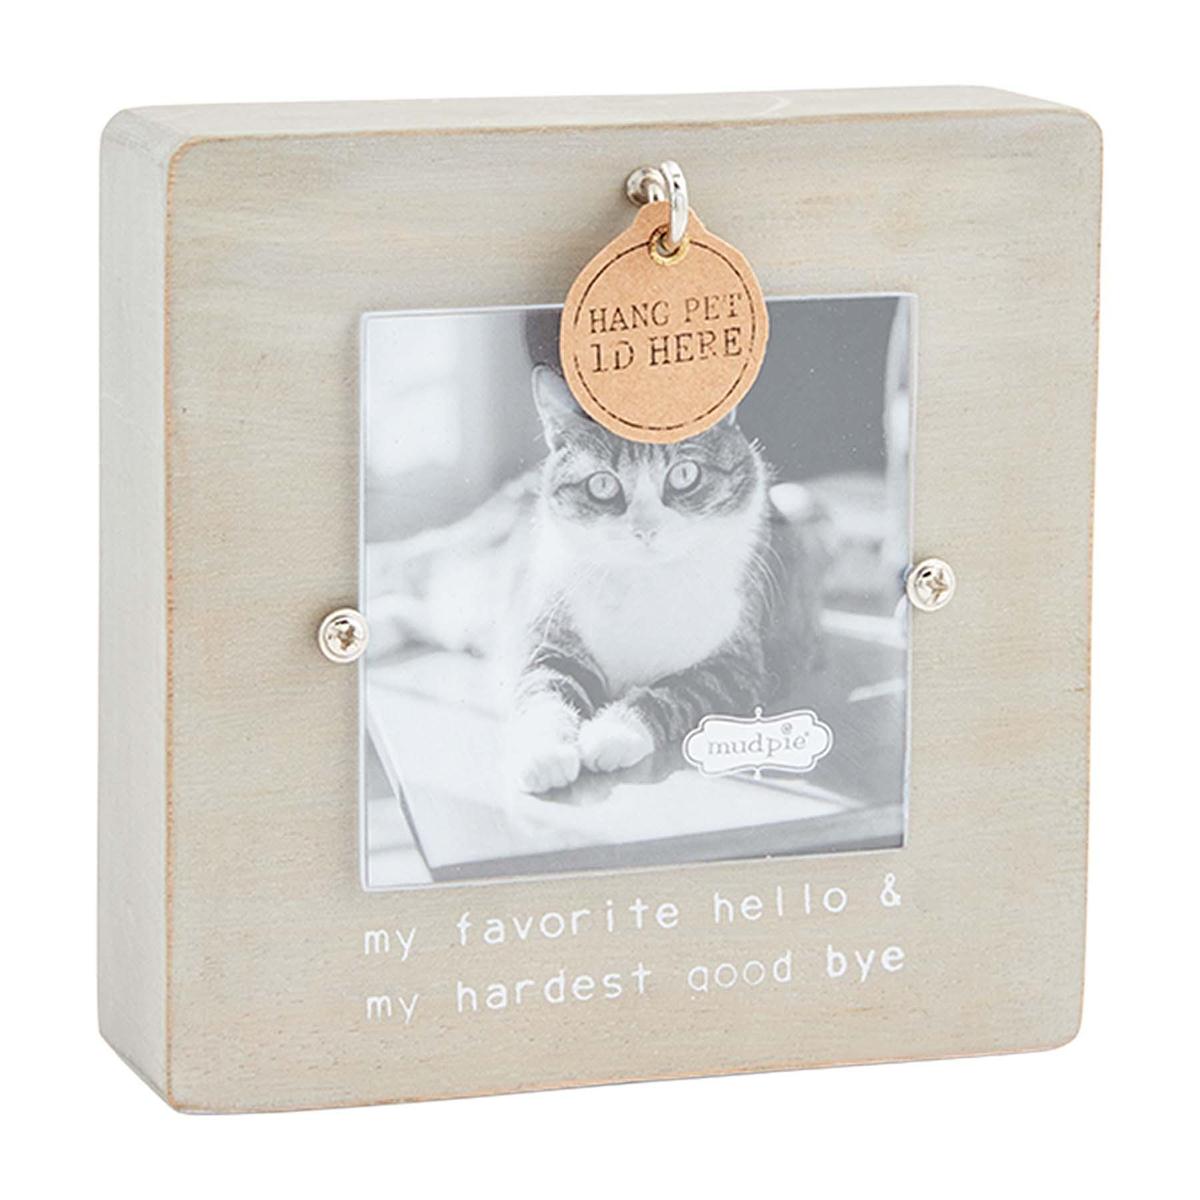 grey wooden pet frame with text "amy favorite hello & my hardest good bye" printed on it.